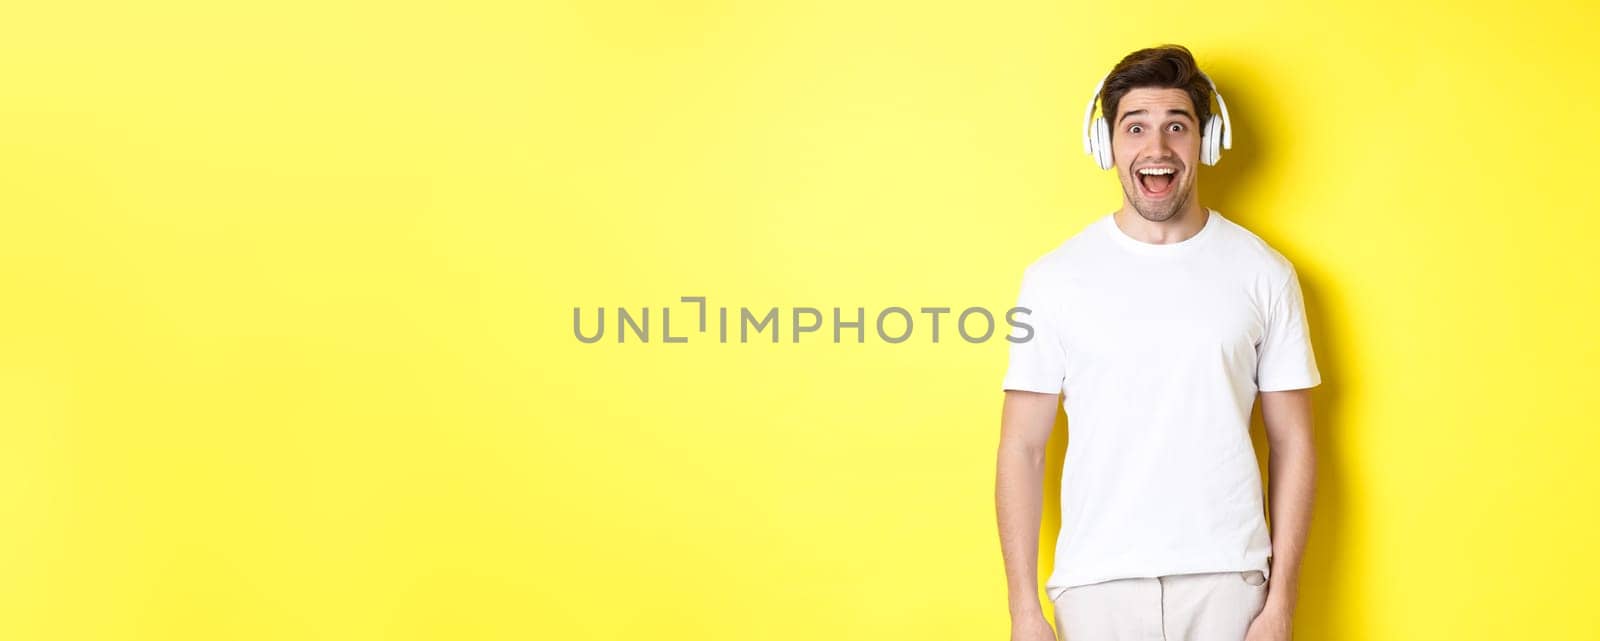 Man in headphones looking surprised, standing against yellow background in white outfit.